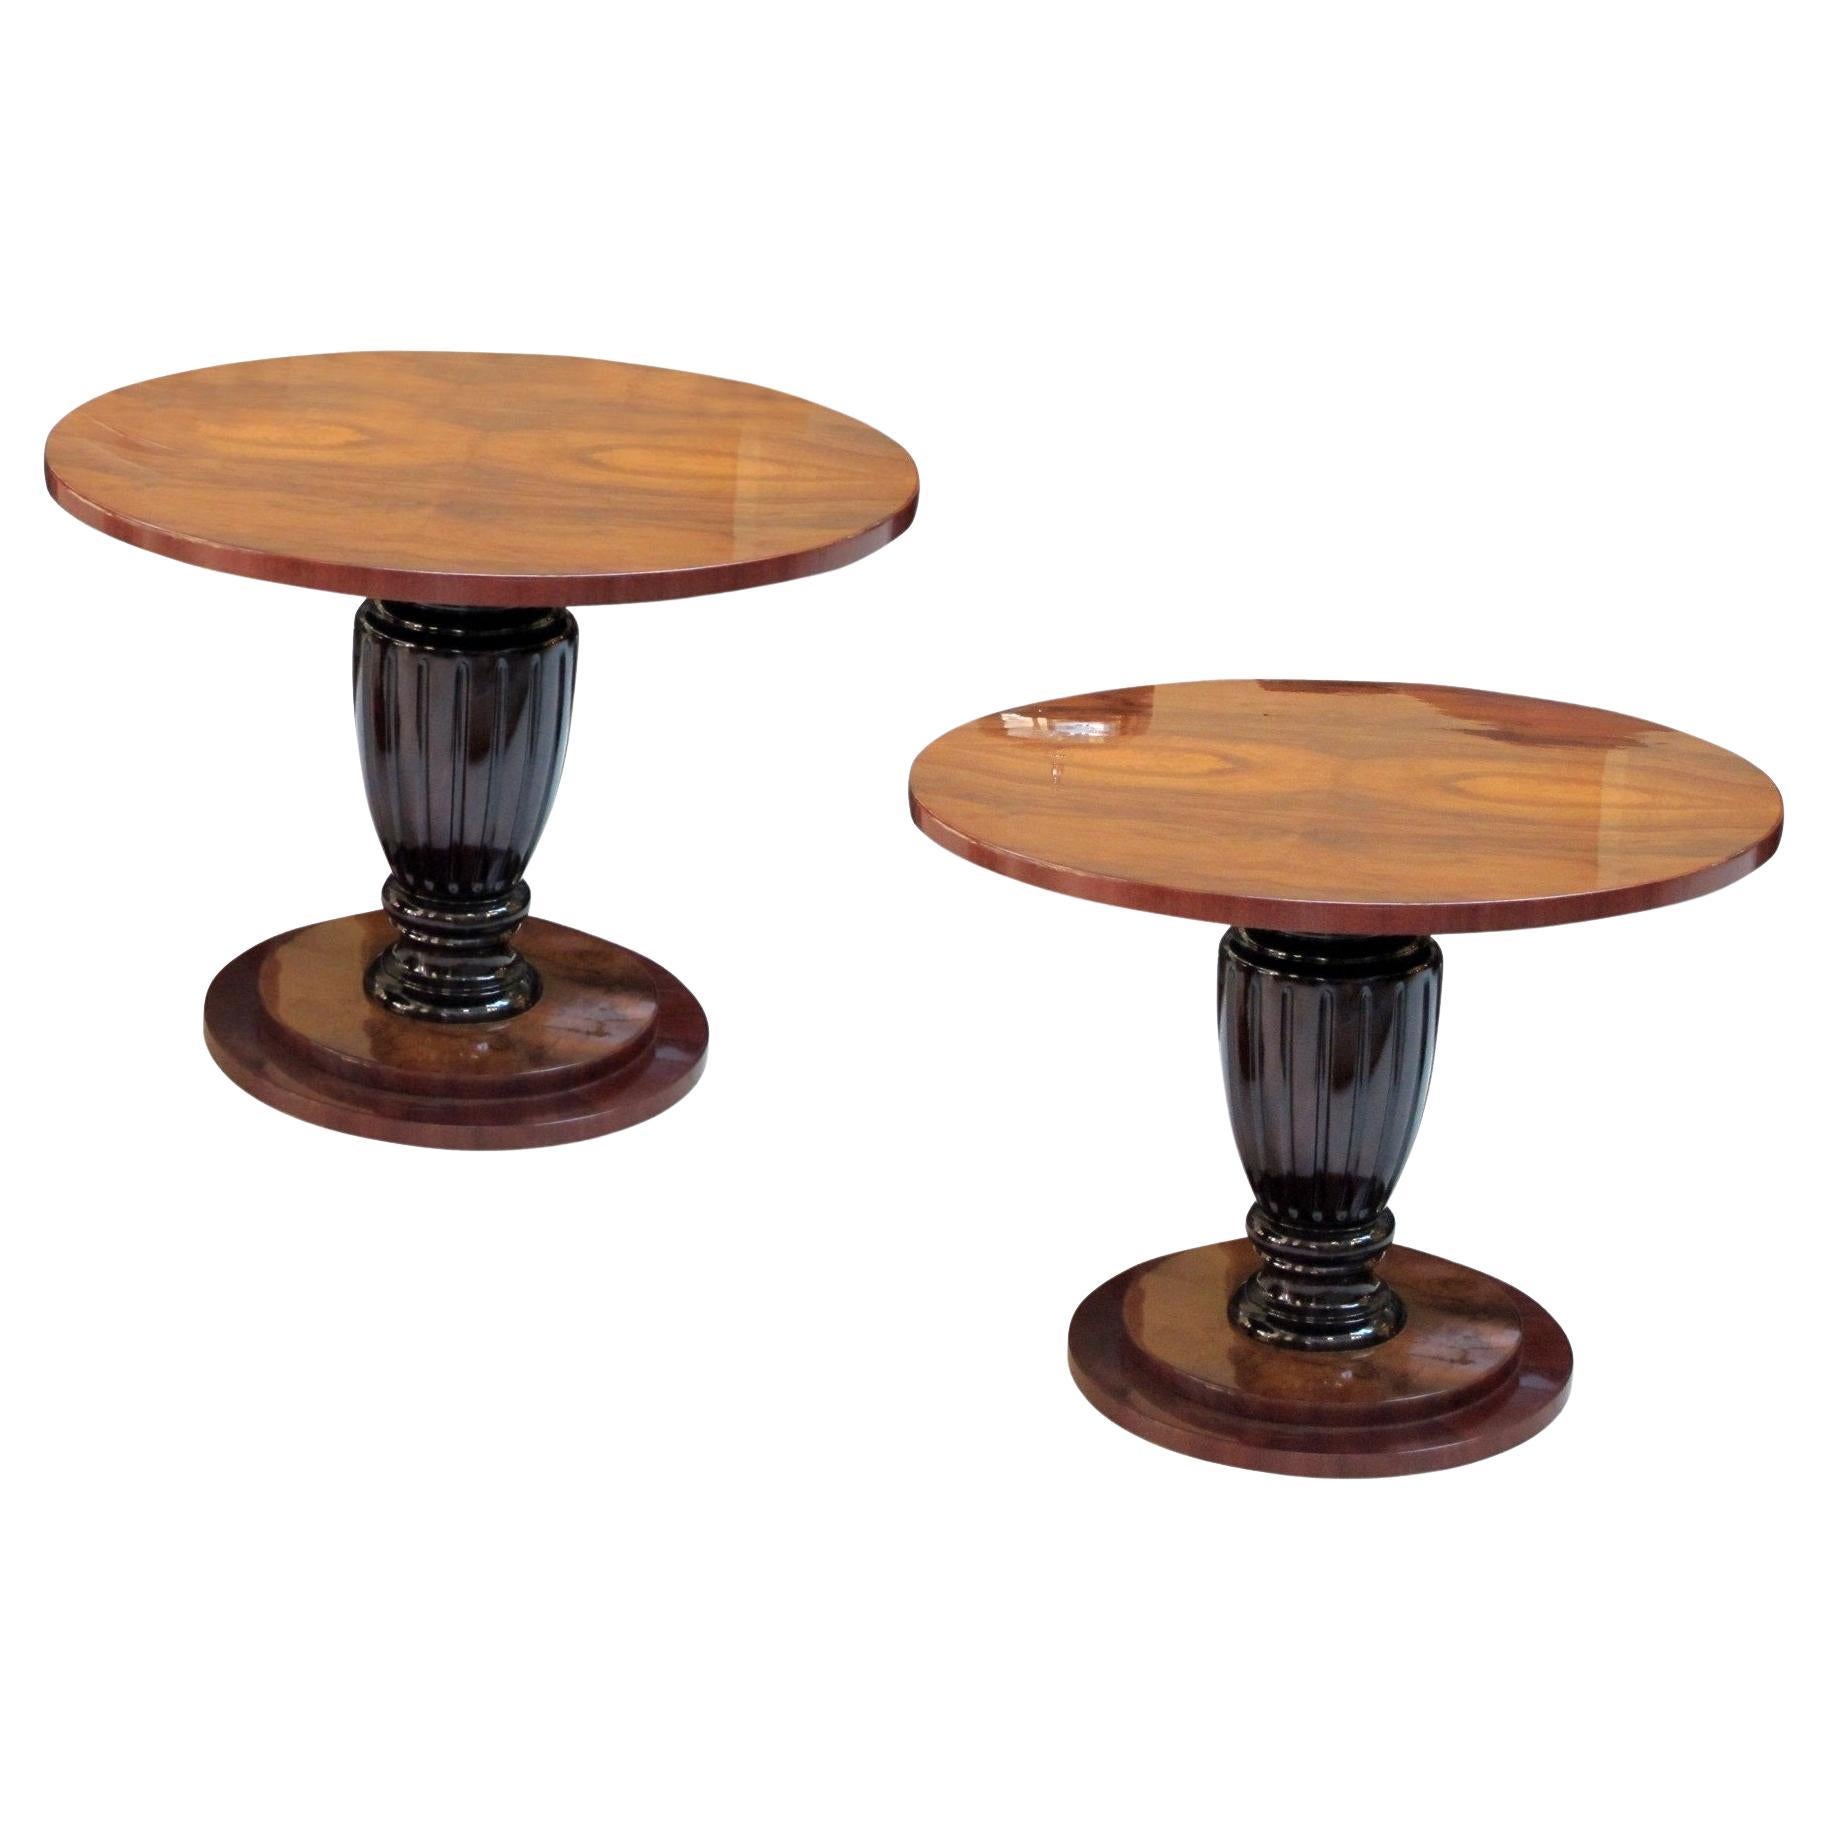 Amaizing Pair of Tables in wood, Art Deco, France, 1930